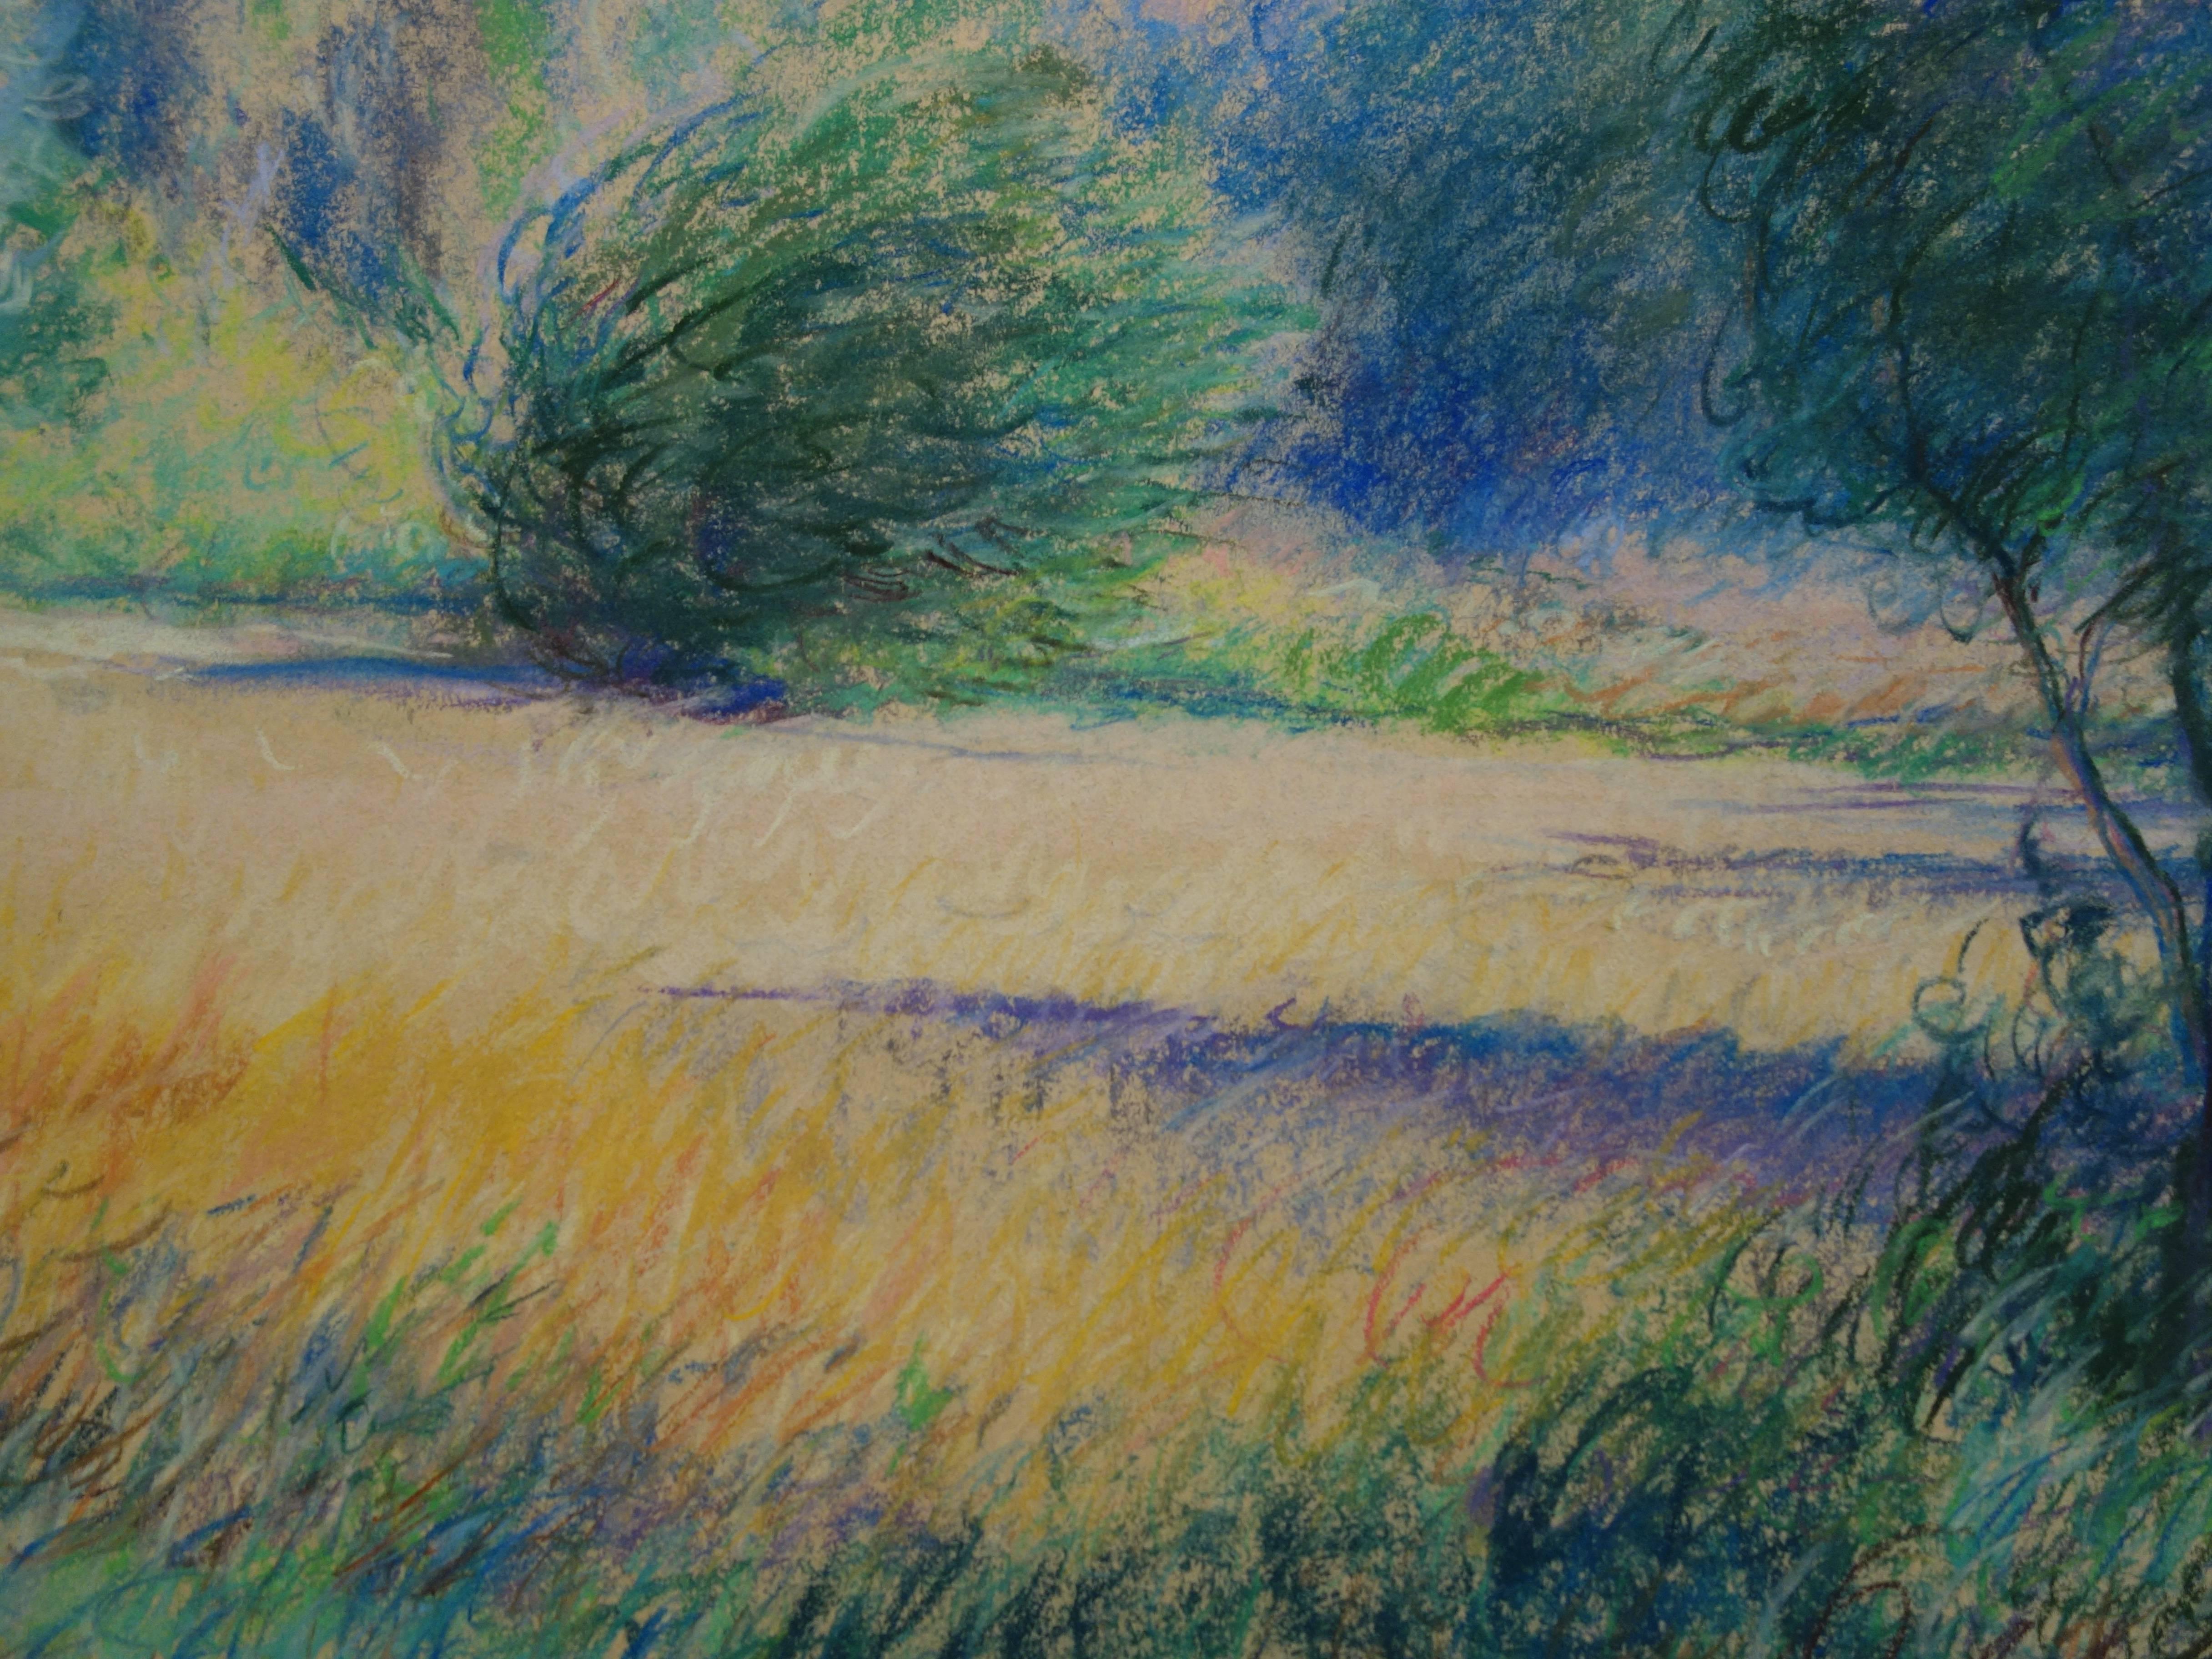 Tribute to Monet : Impressionist Countryside - Original charcoal drawing, Signed - Post-Impressionist Art by Gaston Coppens